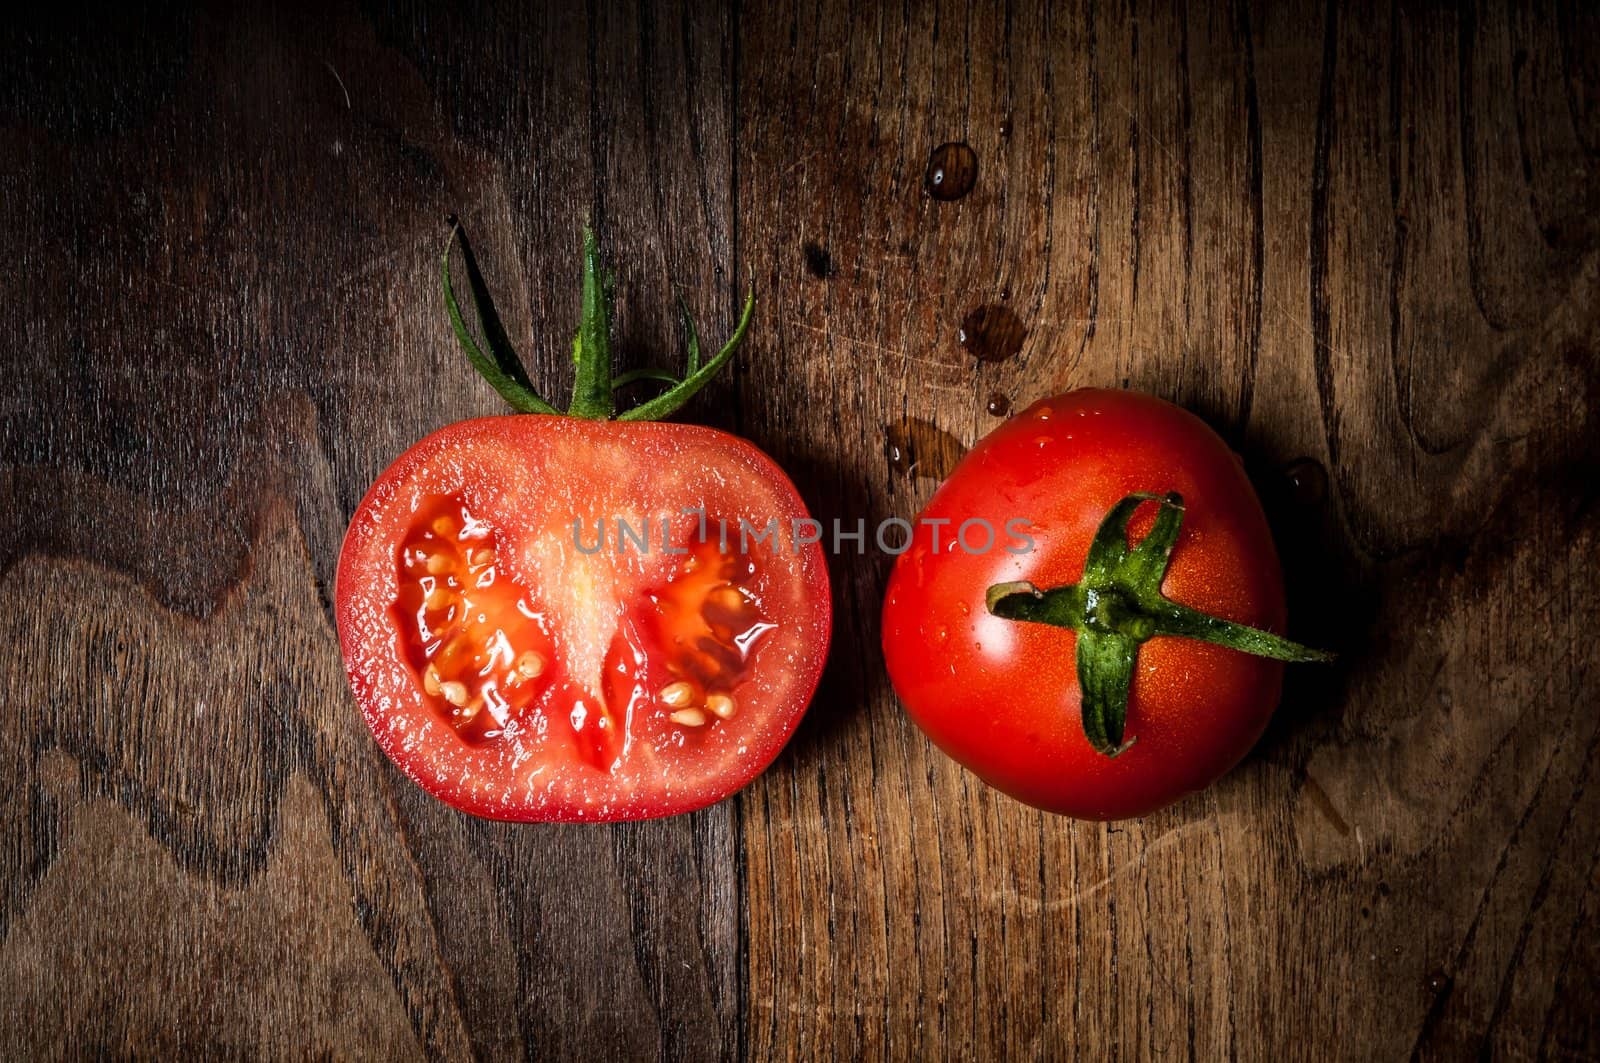 half and whole tomatoes on wood by peus